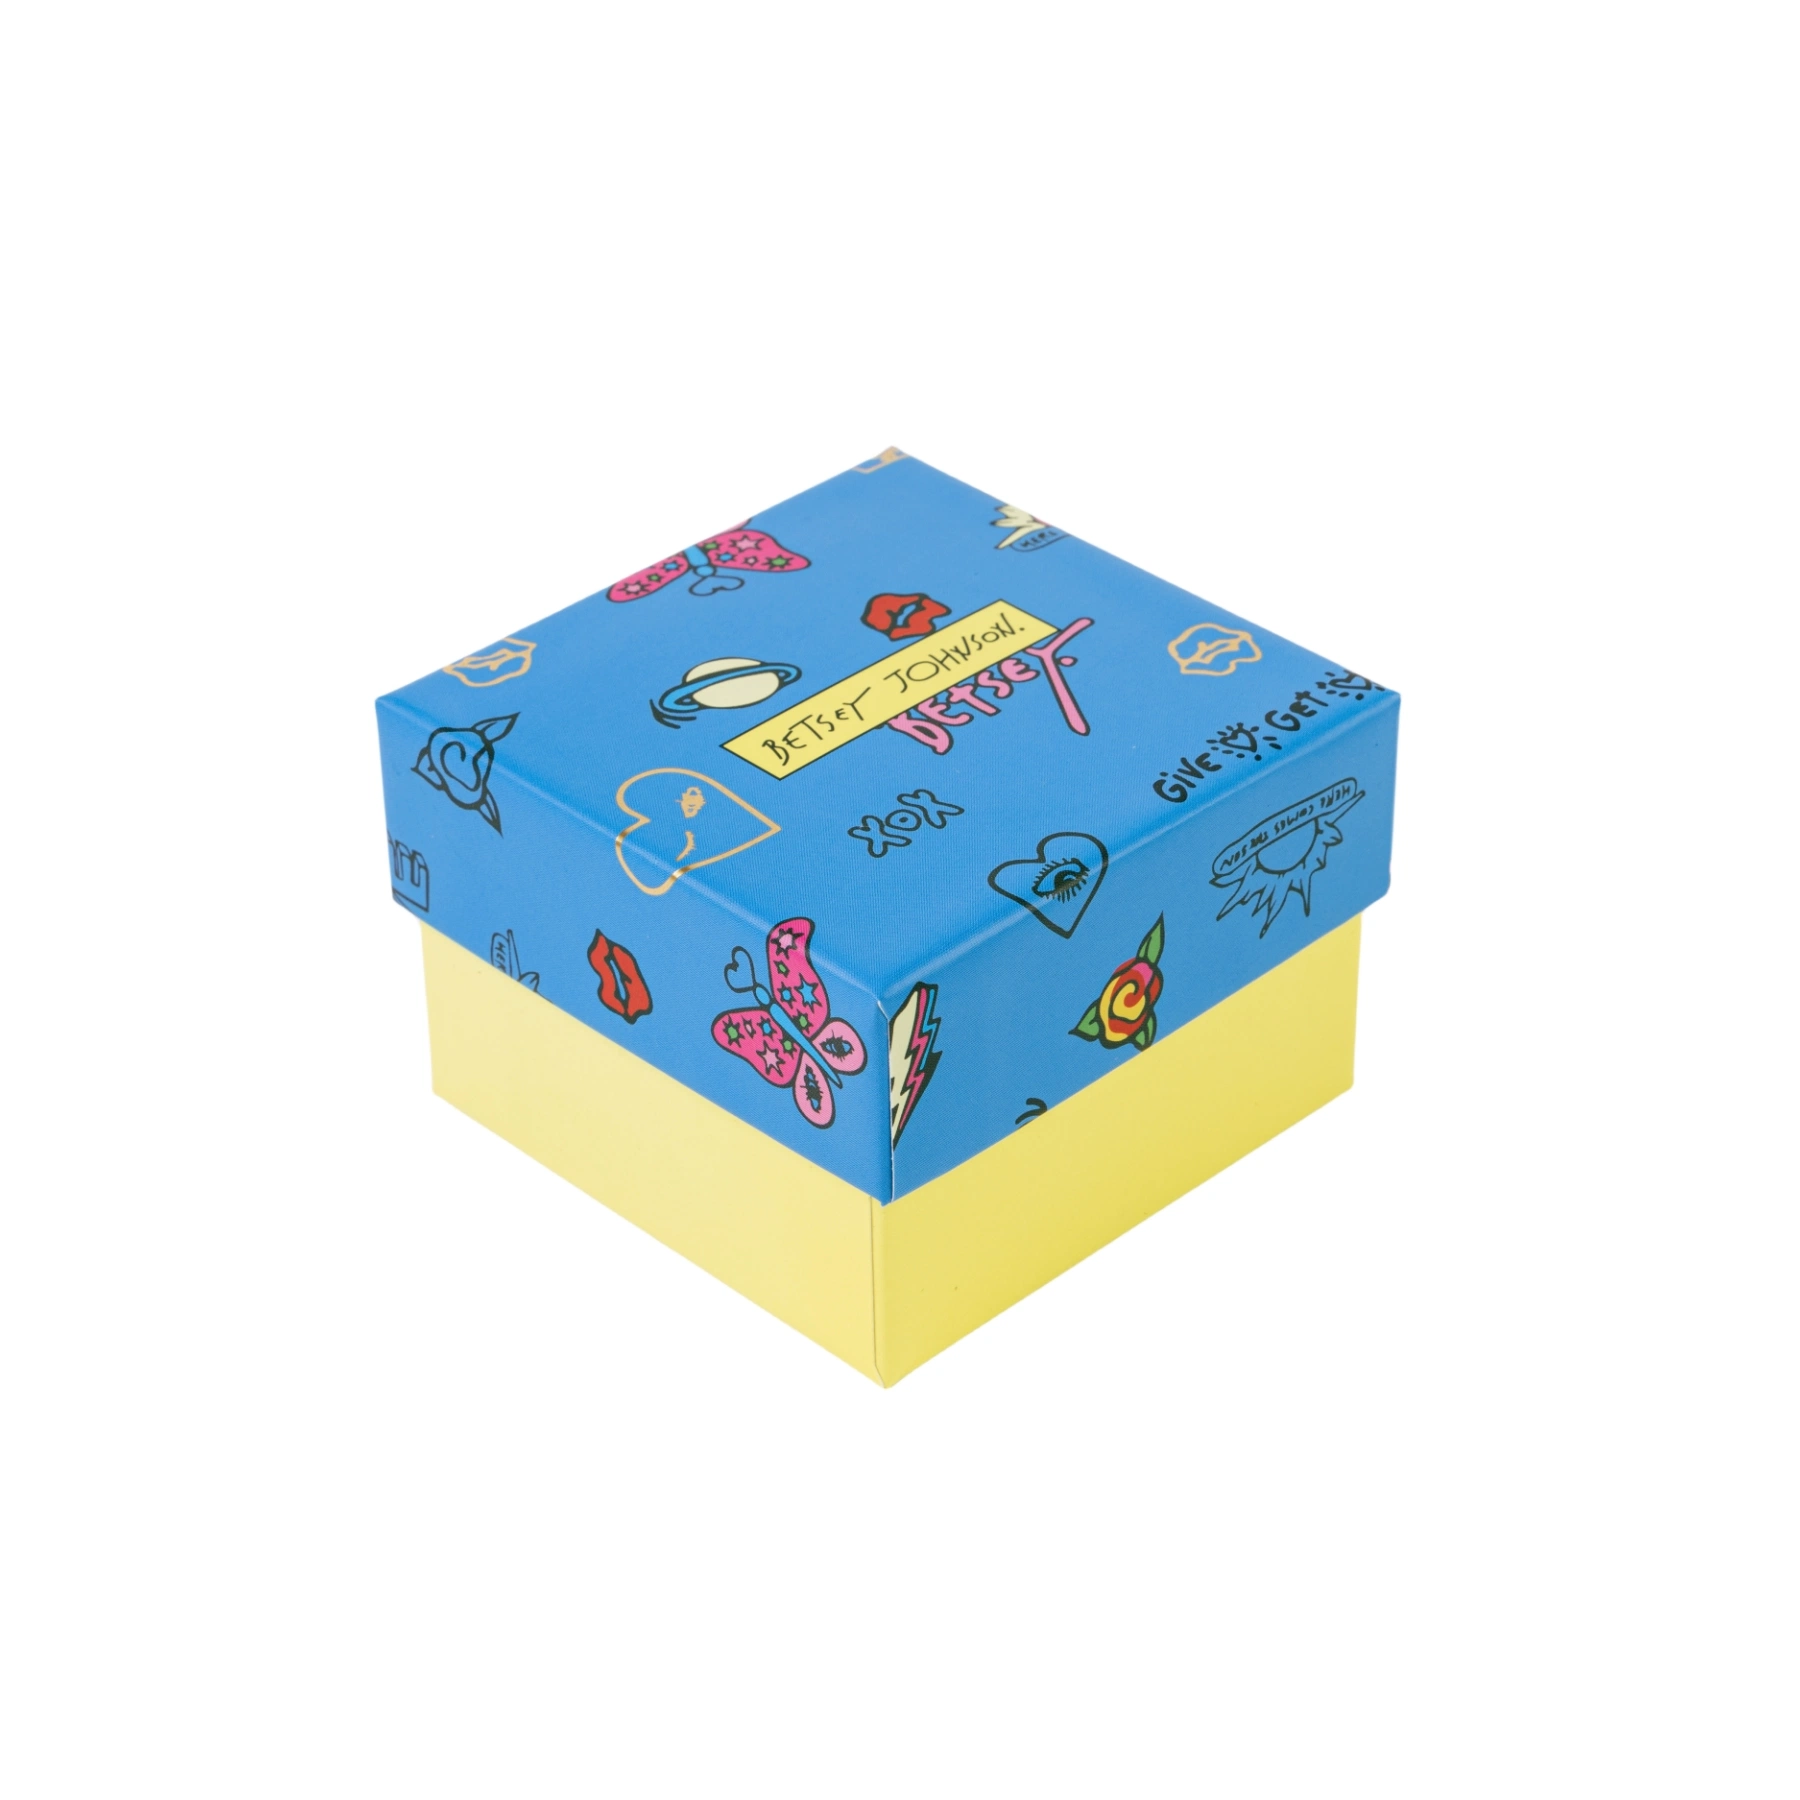 Luxury Cardboard Gift Box for Gift and Promotion